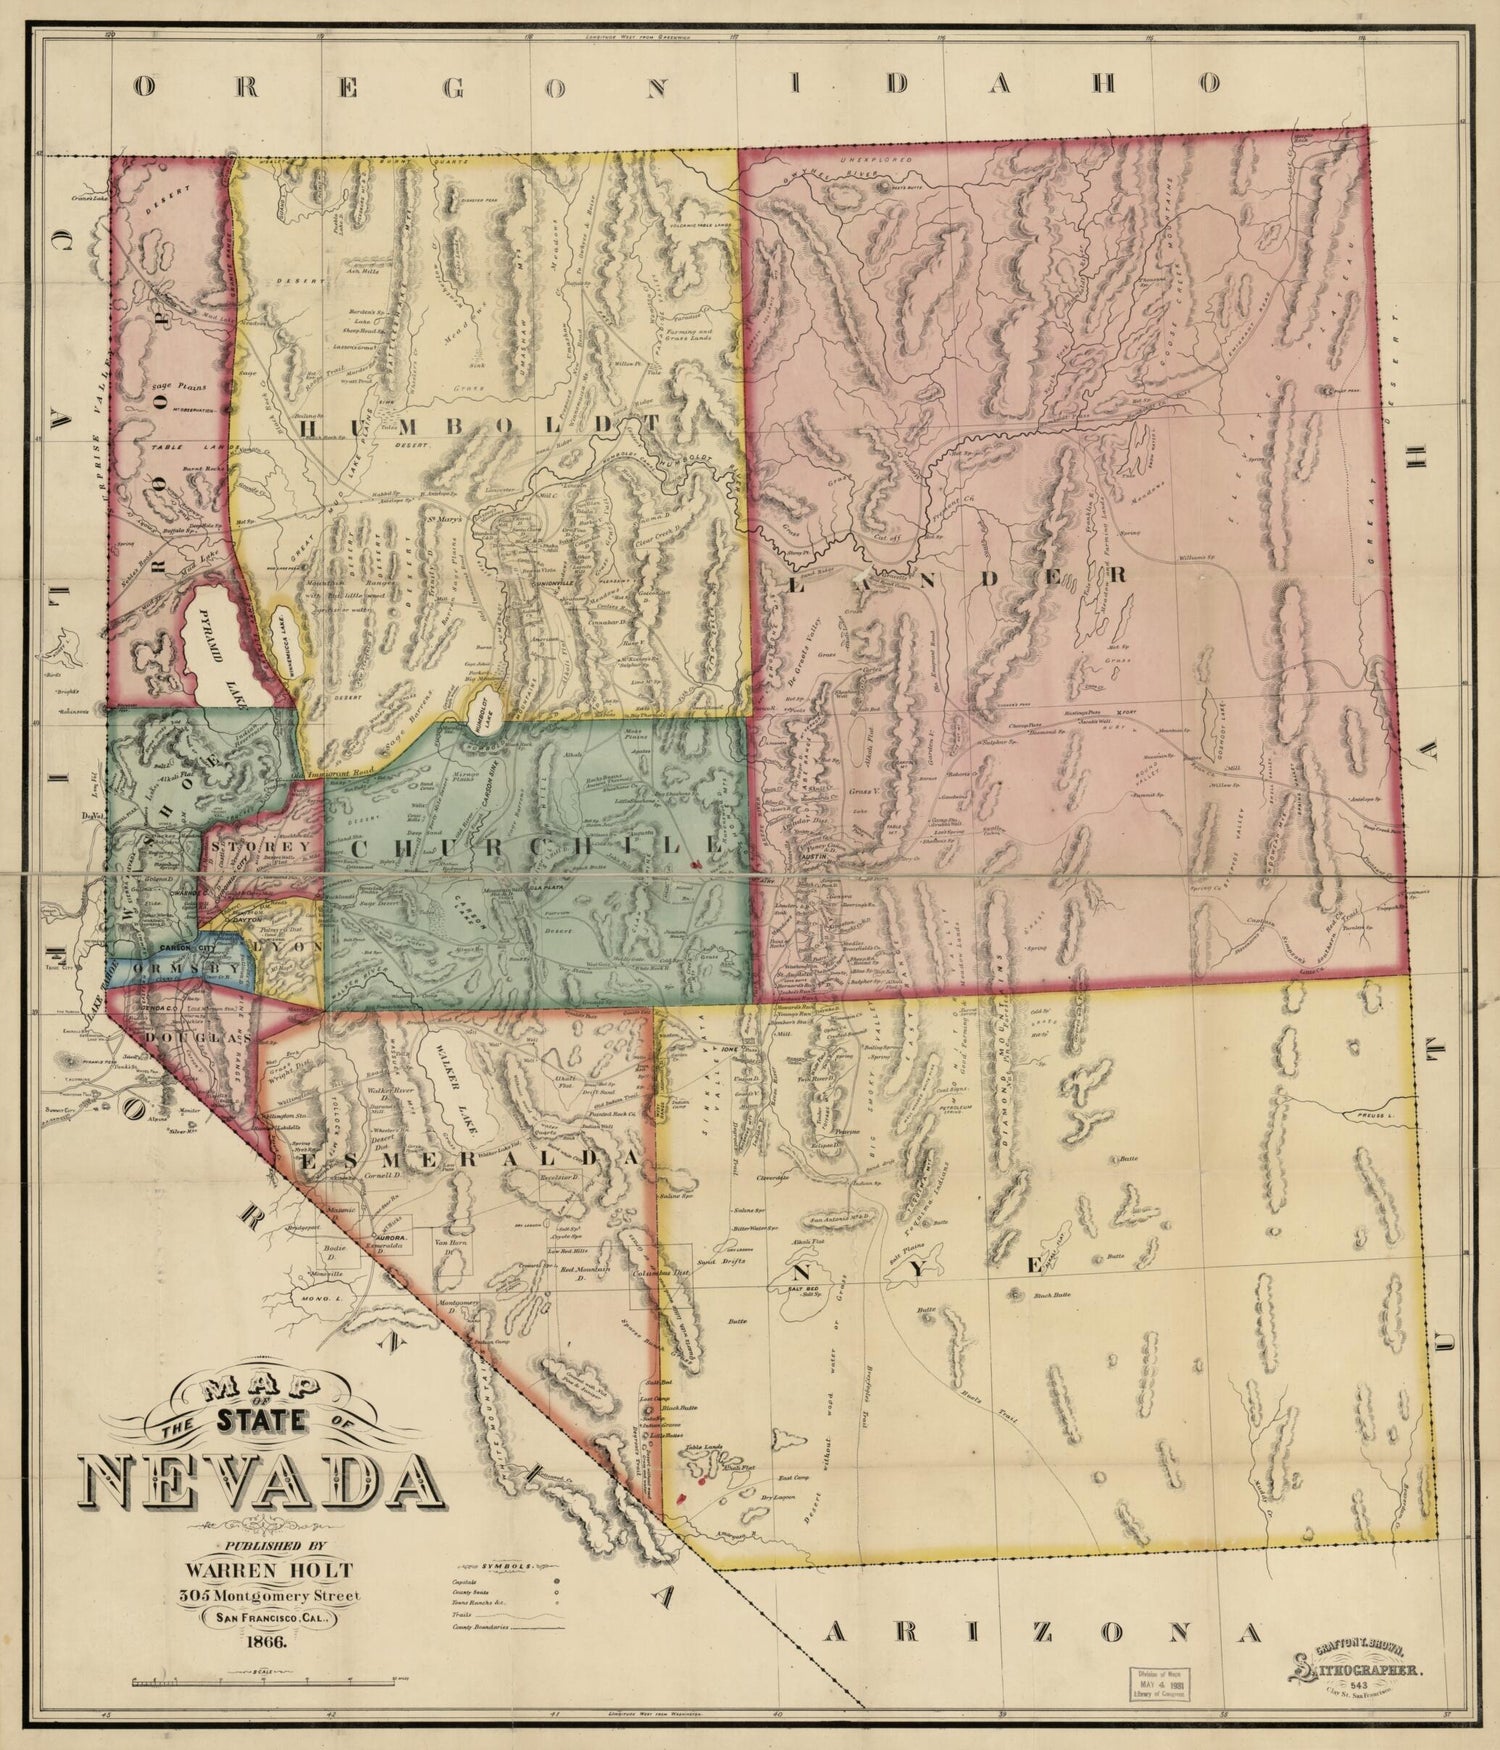 This old map of Map of the State of Nevada from 1866 was created by Grafton Tyler Brown in 1866